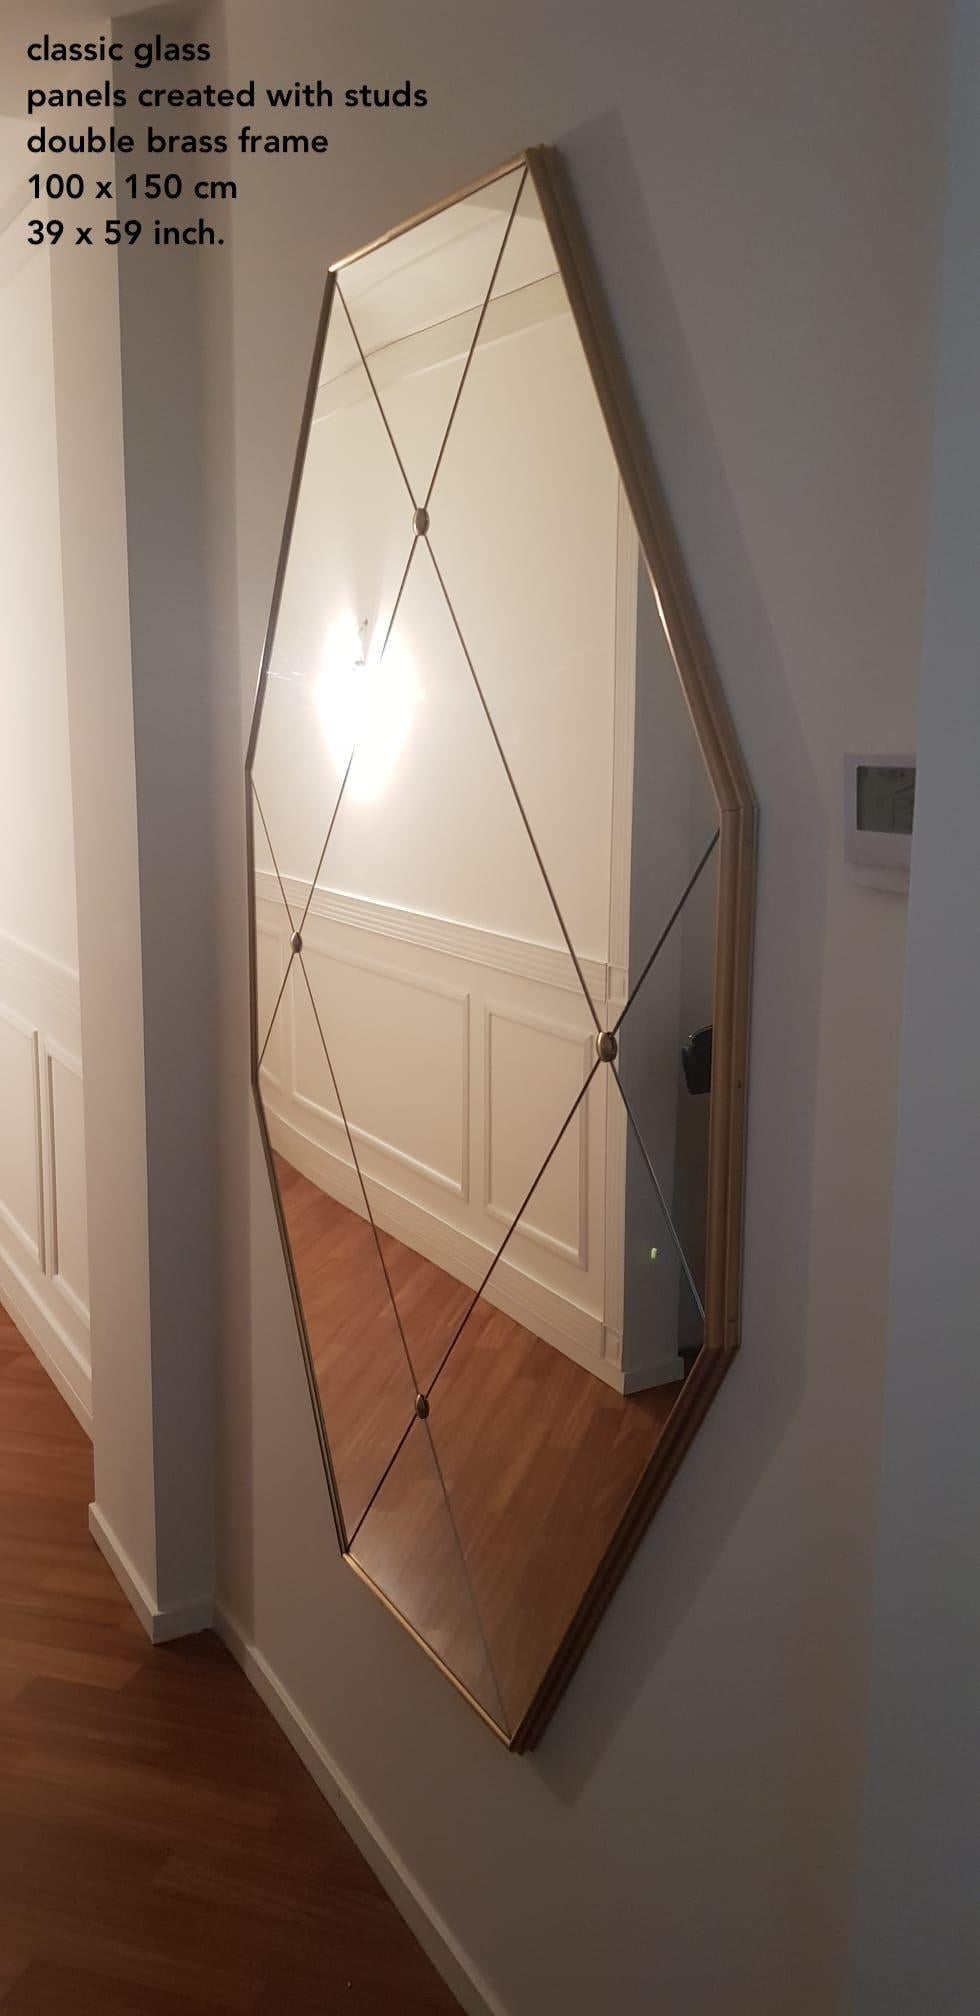 Contemporary 21st Century Octagonal Art Deco Style Brass Paneled Classic Mirror 100 X 150 CM For Sale